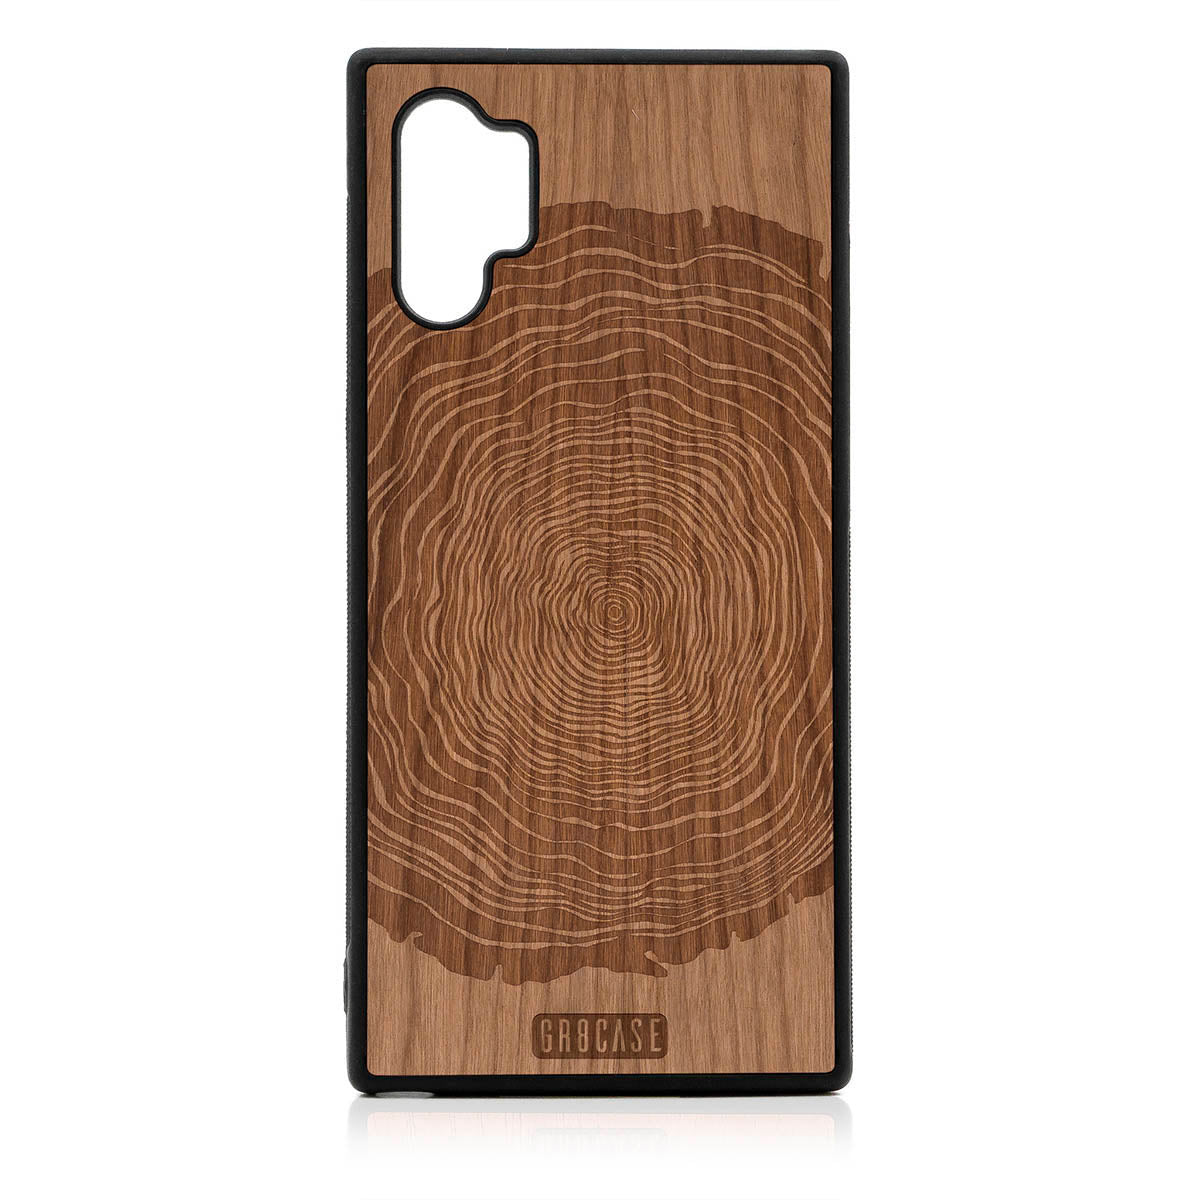 Tree Rings Design Wood Case For Samsung Galaxy Note 10 Plus